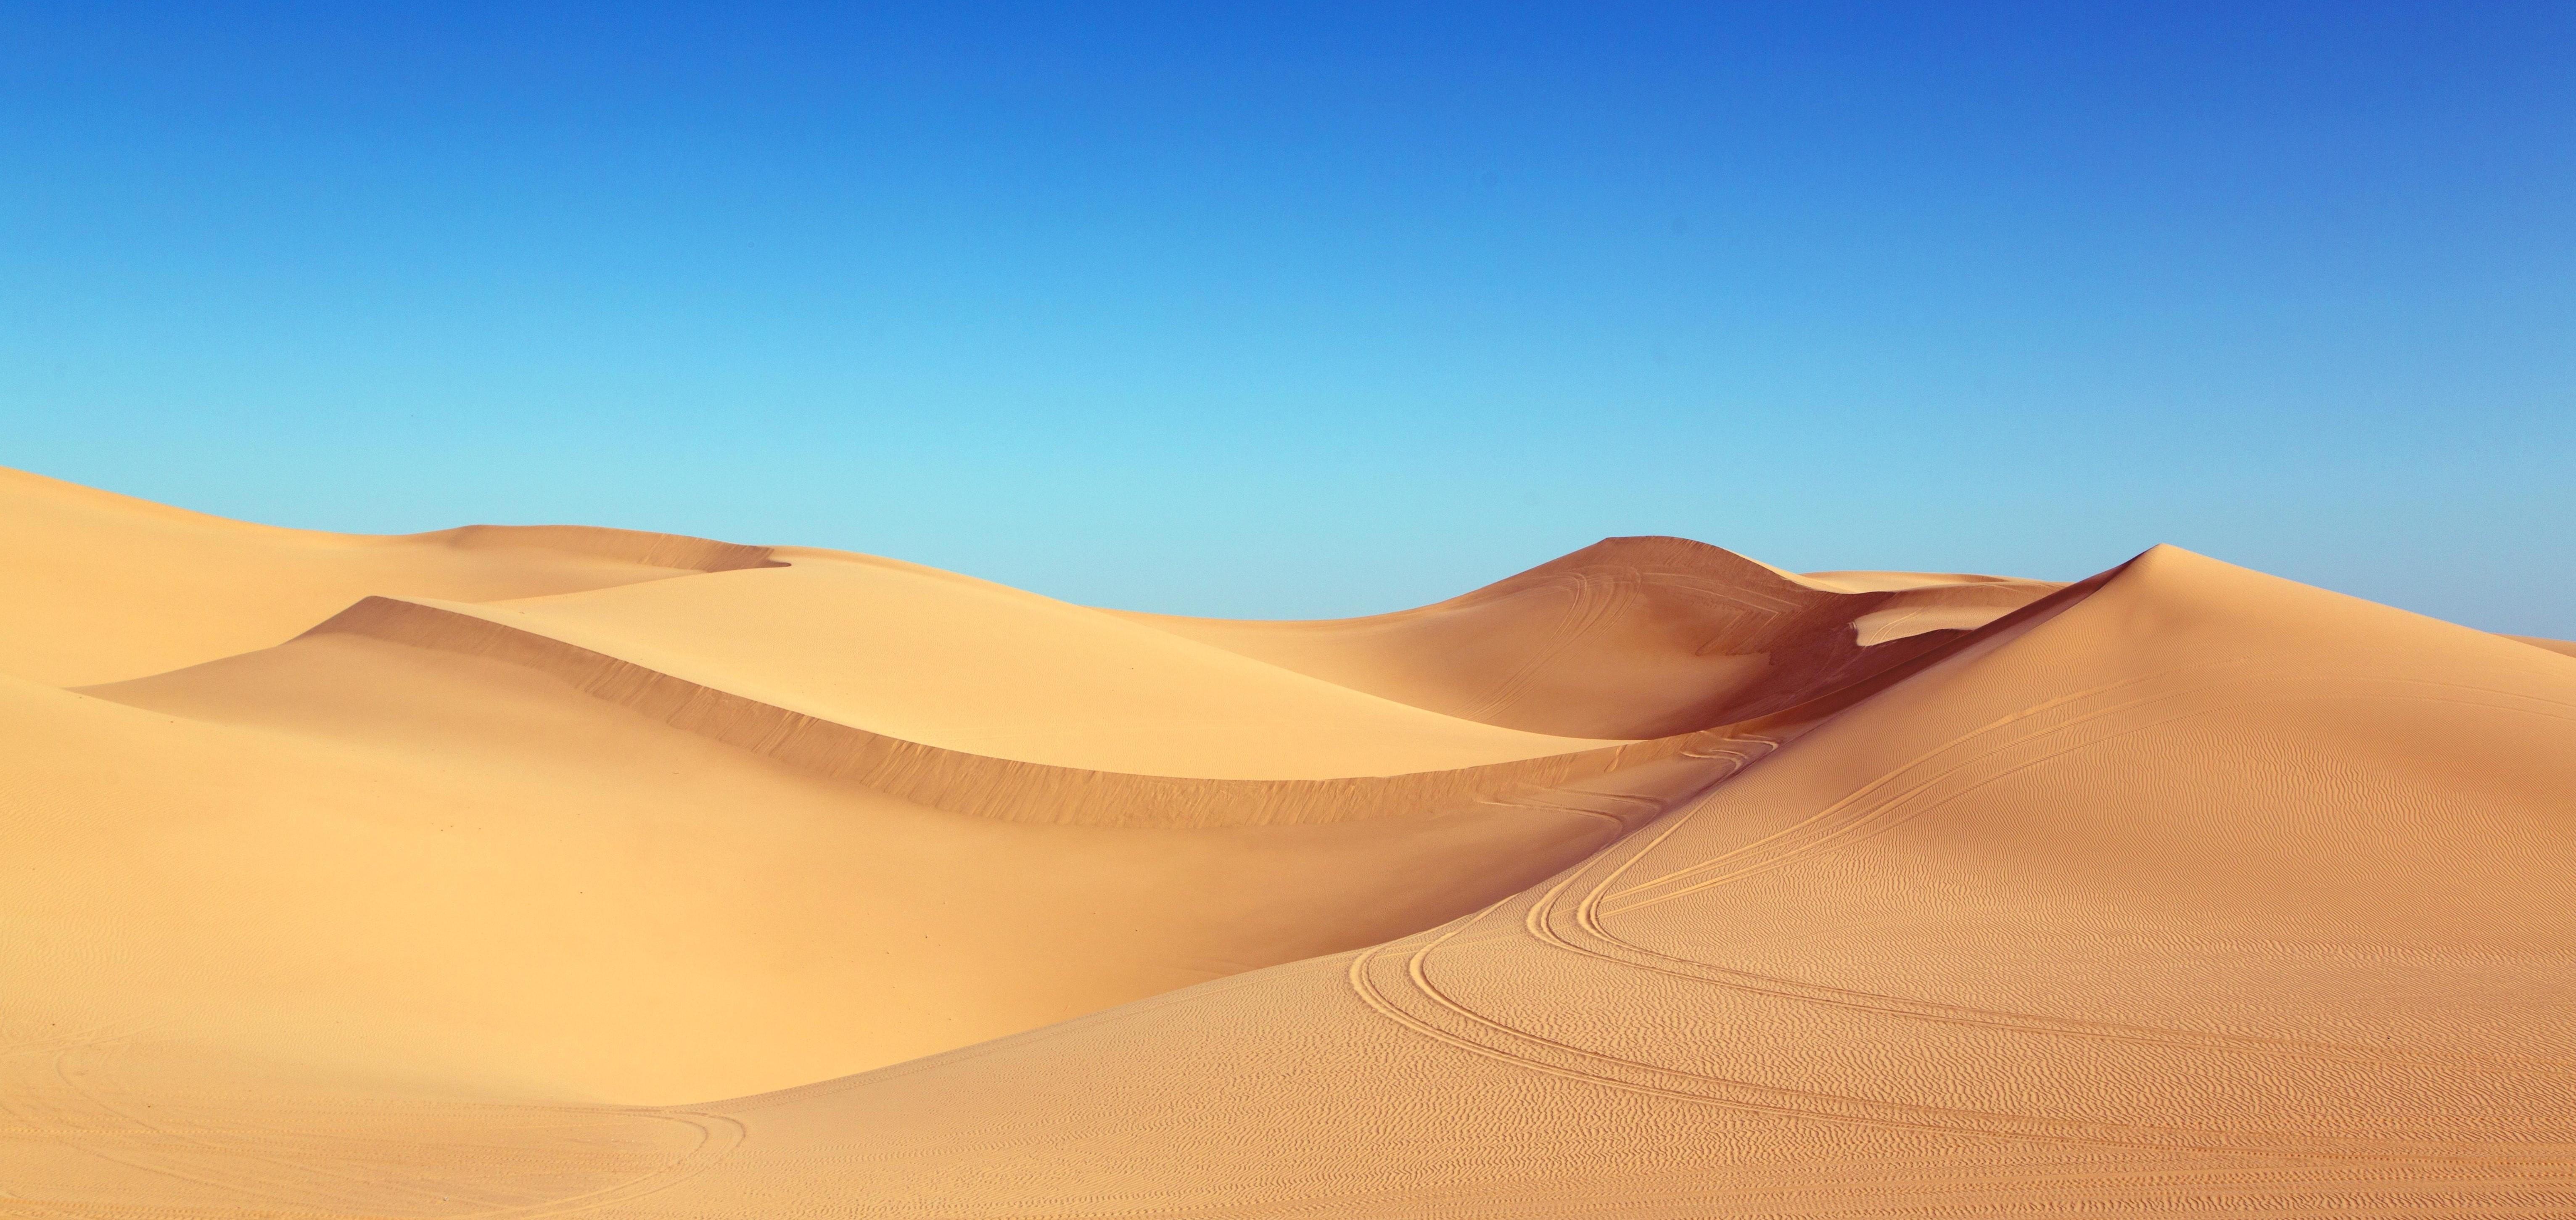 Image of a desert with sand dunes and sunny sky